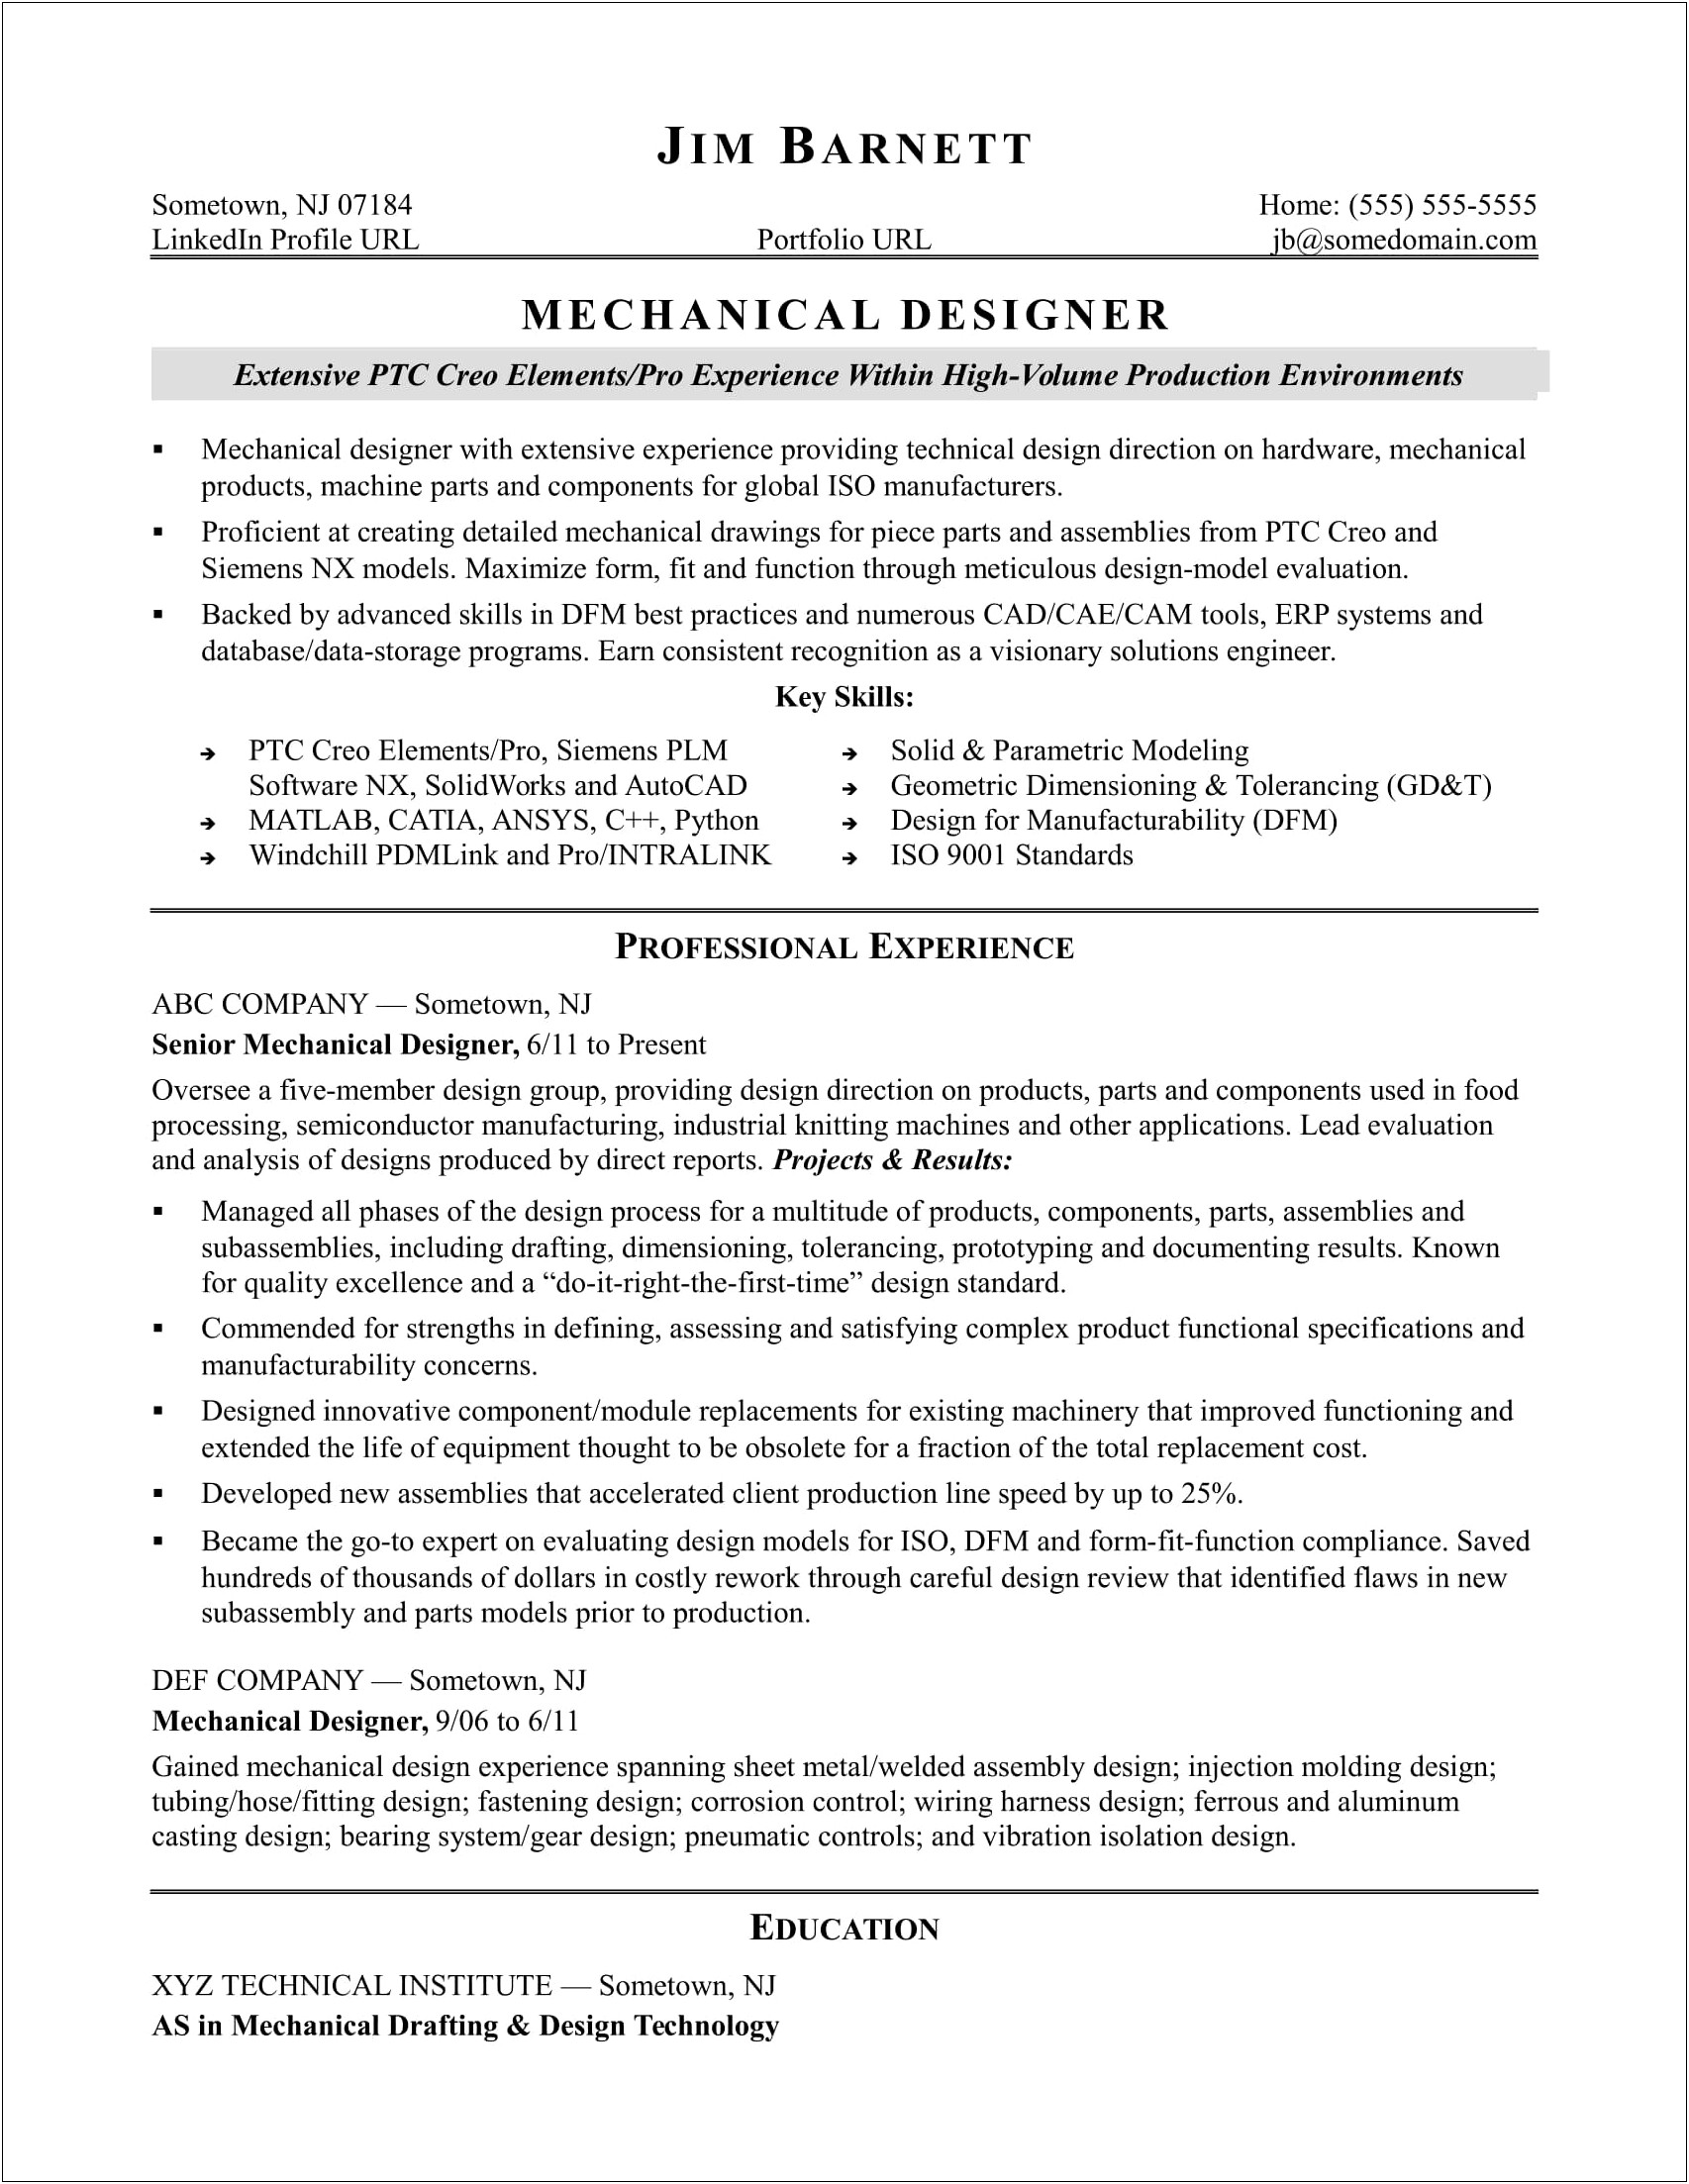 Resume Objective Example For Design Engineer